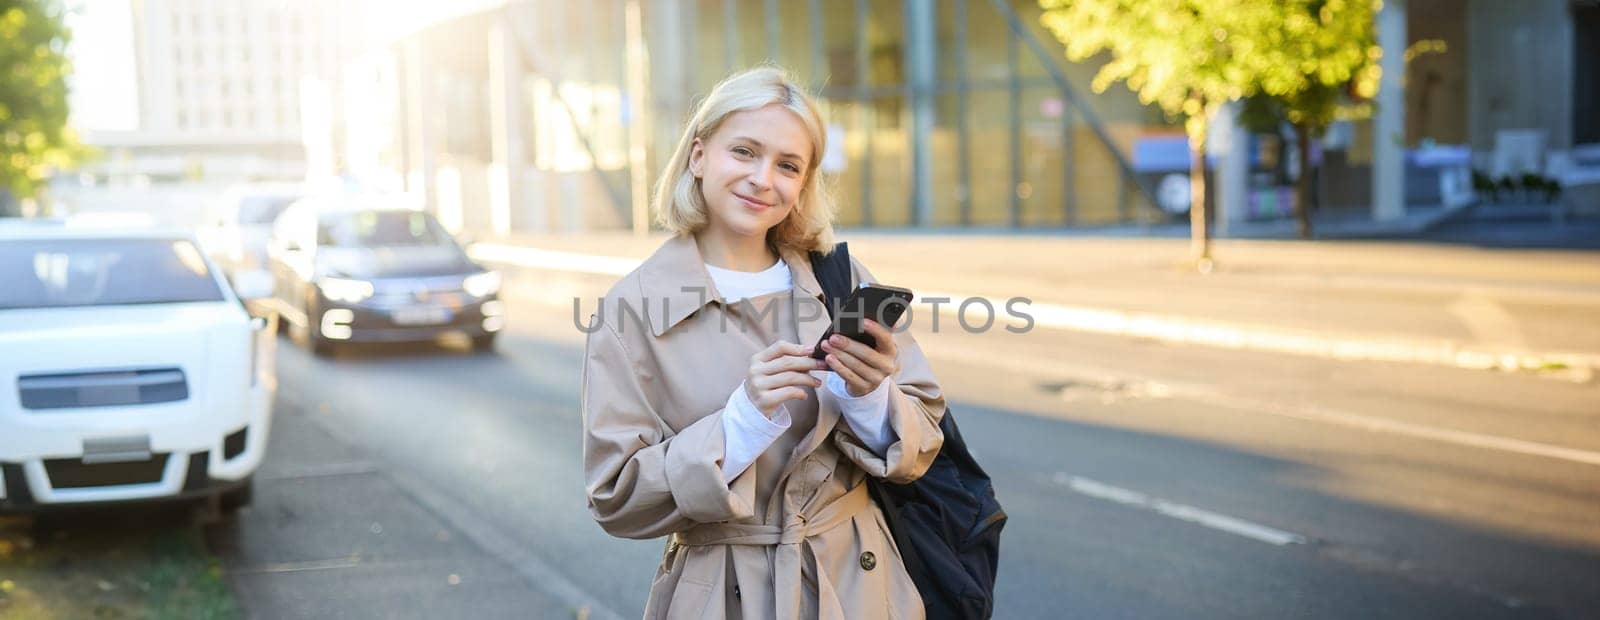 Lifestyle portrait of young woman on street, standing near road with cars, carries backpack and holds mobile phone, requests a ride on smartphone app, smiling and looking happy at camera.